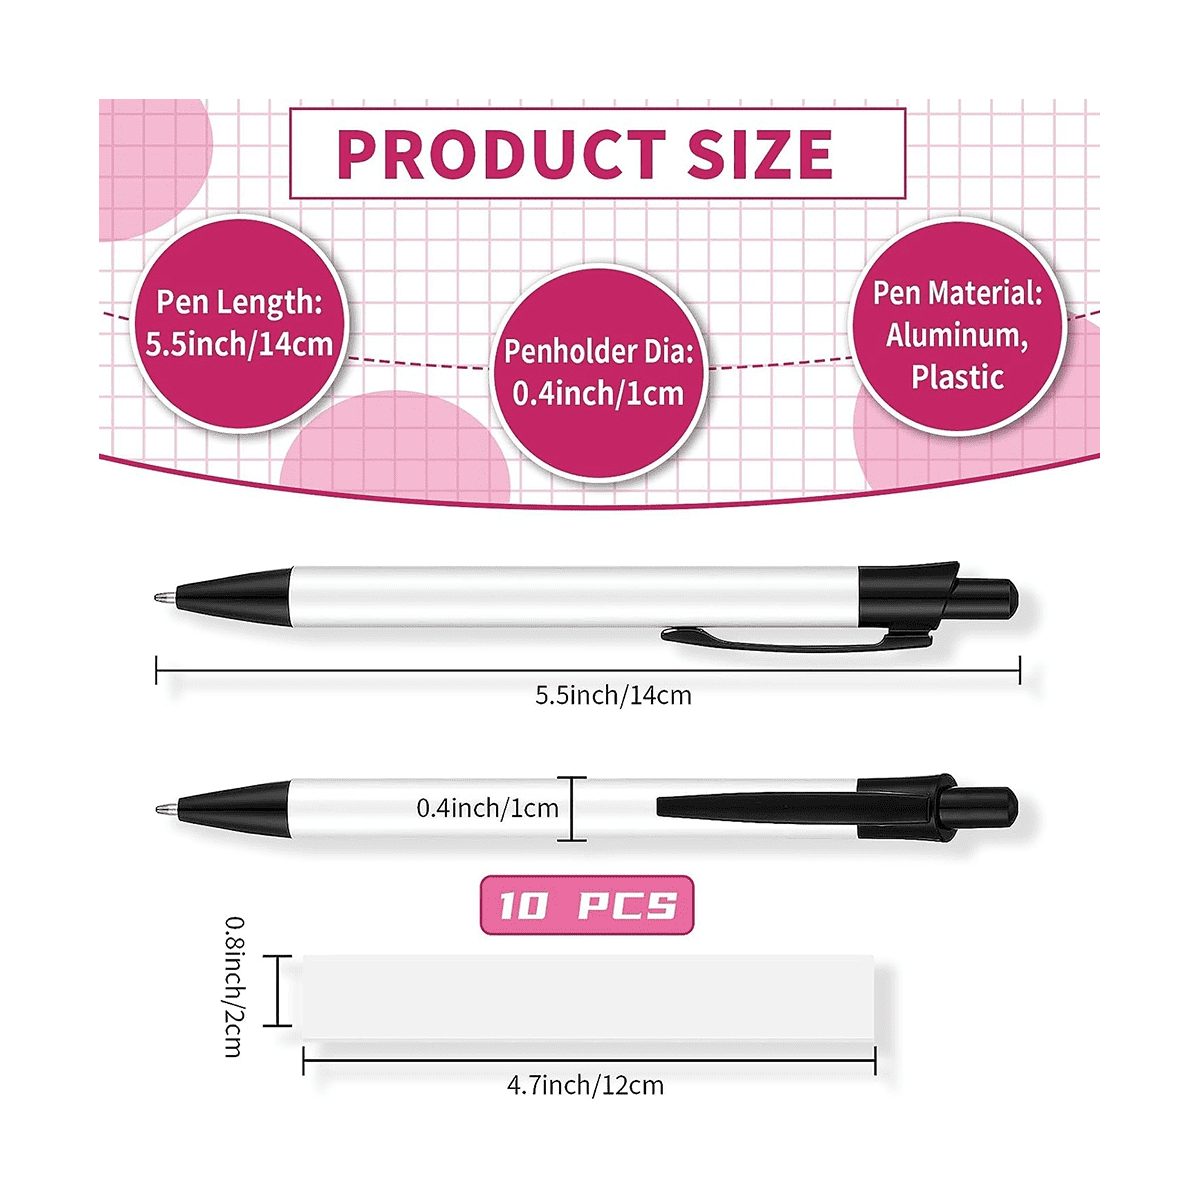 Blank Pen Sublimation Ballpoint Pen Clip Pen with Black Ink - LPFZ698 -  IdeaStage Promotional Products